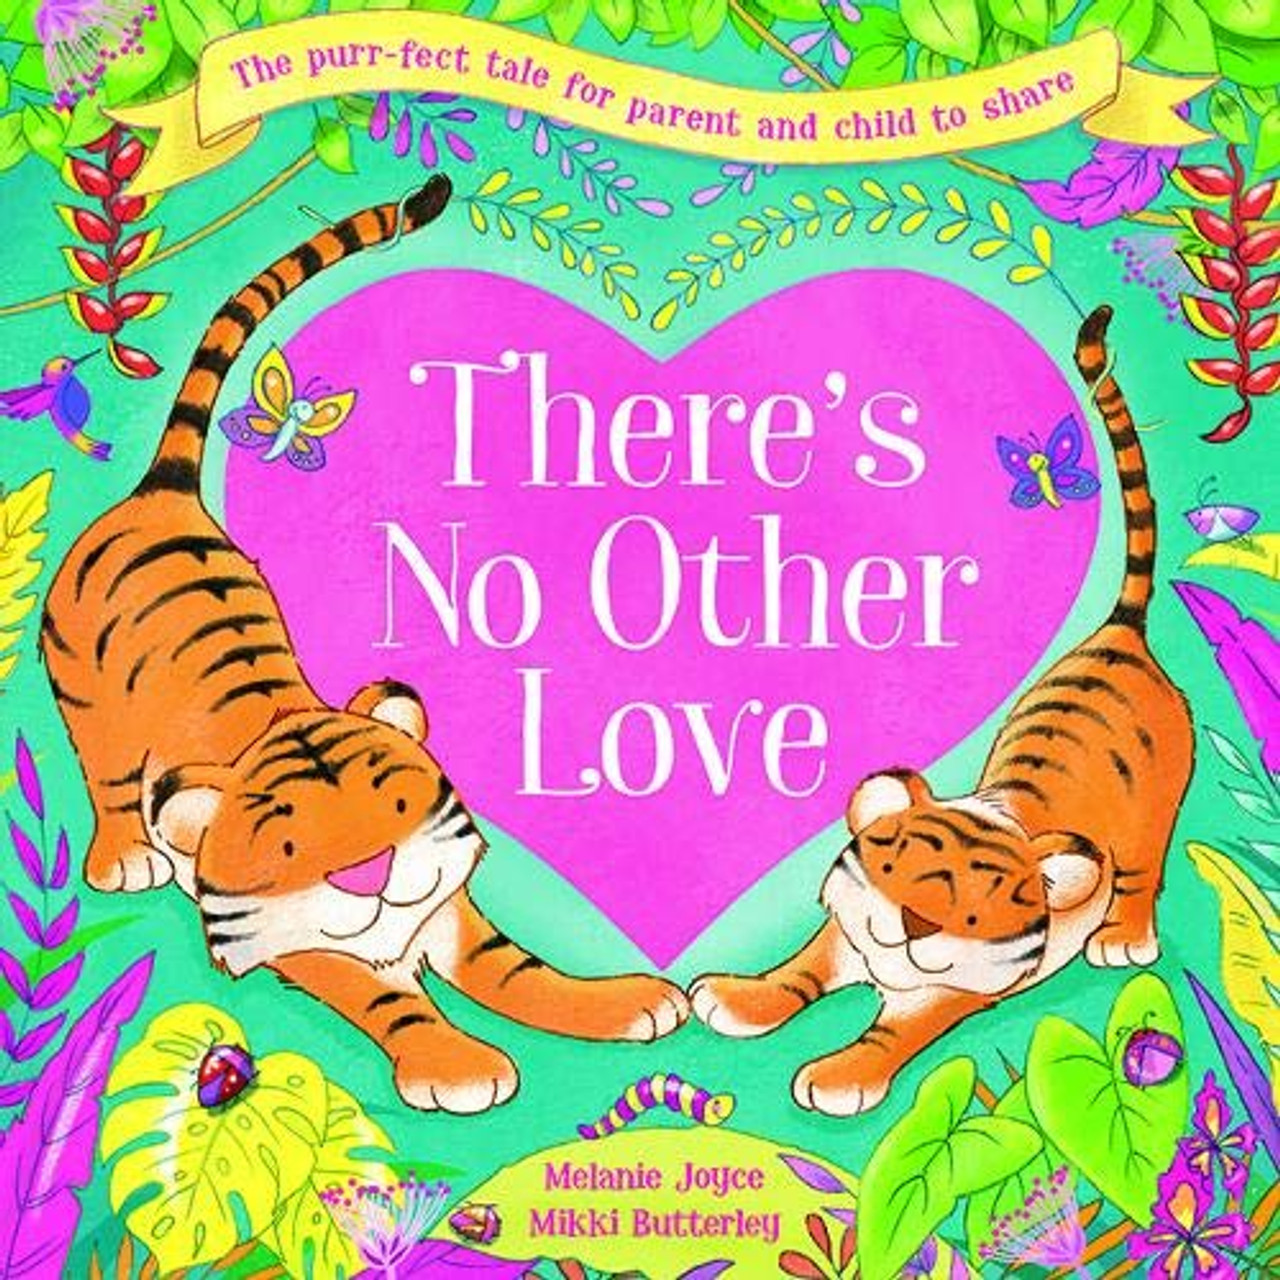 There's No Other Love (Children's Picture Book)